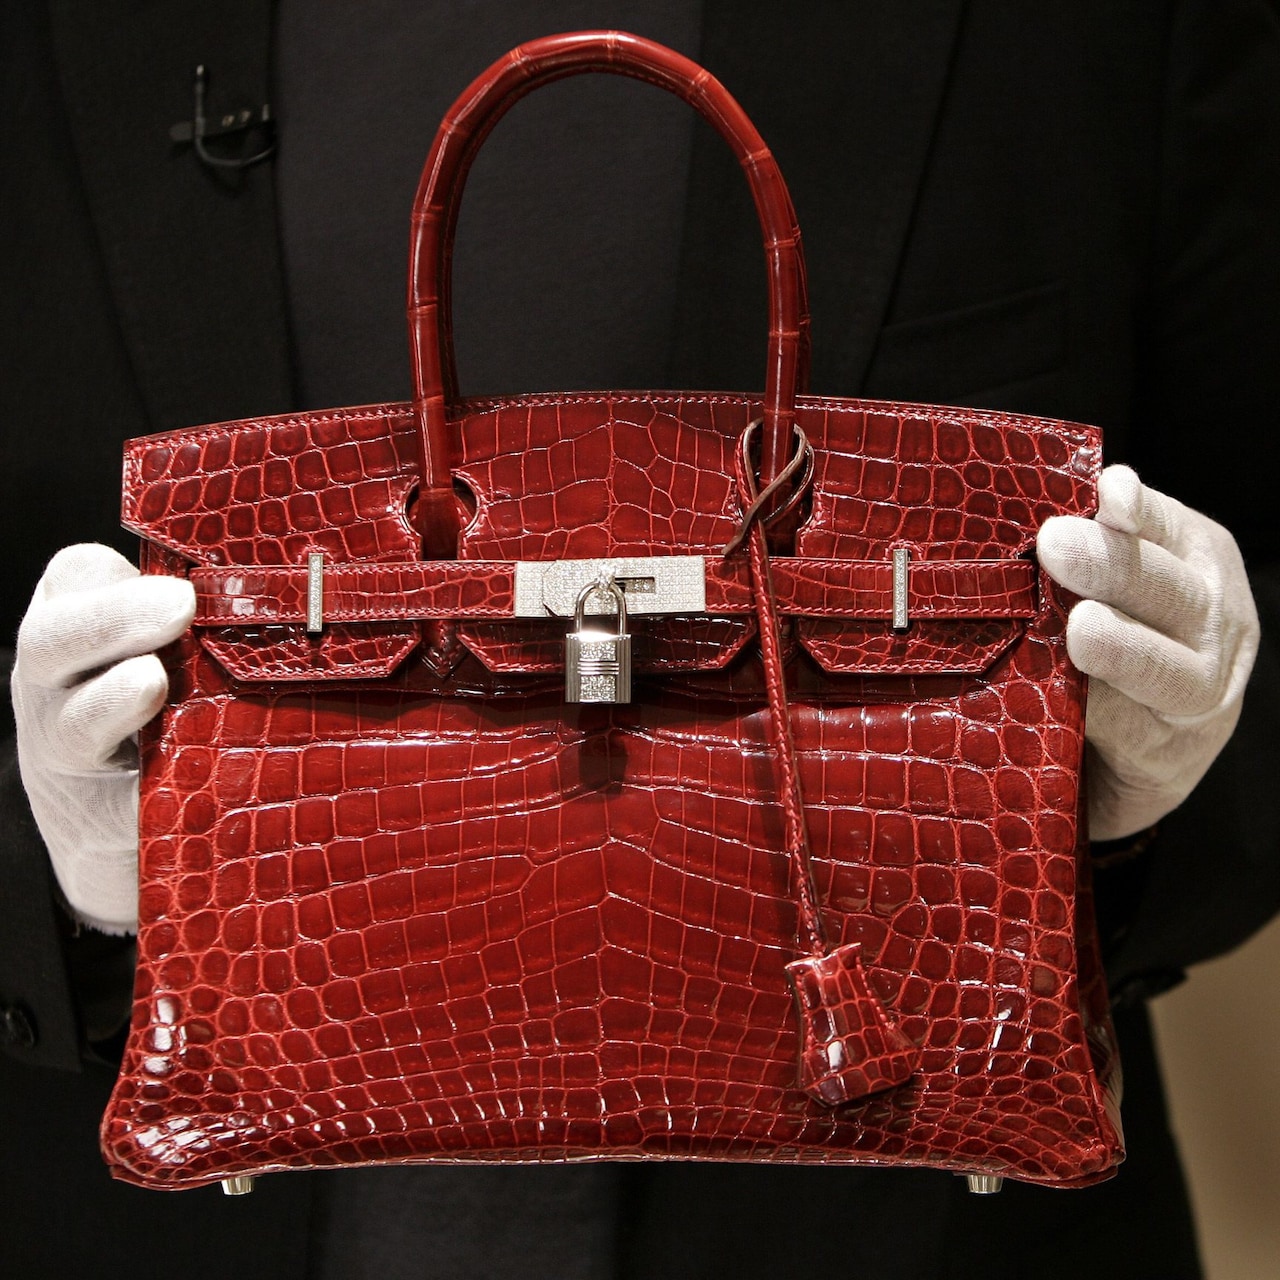 how much is the most expensive birkin bag